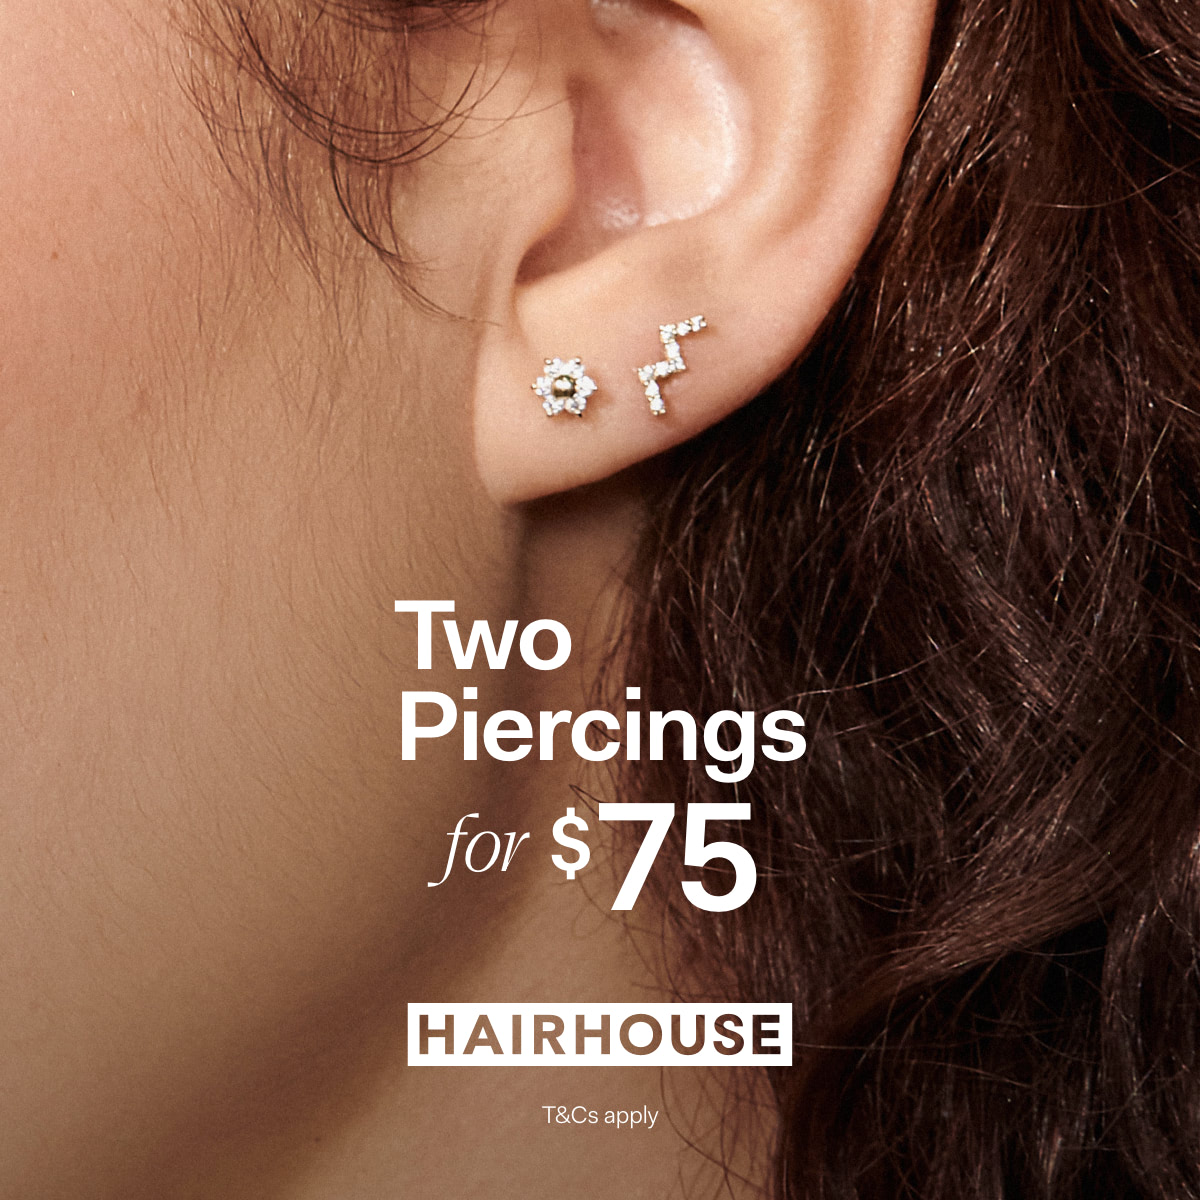 Style and stack your piercings at Hairhouse